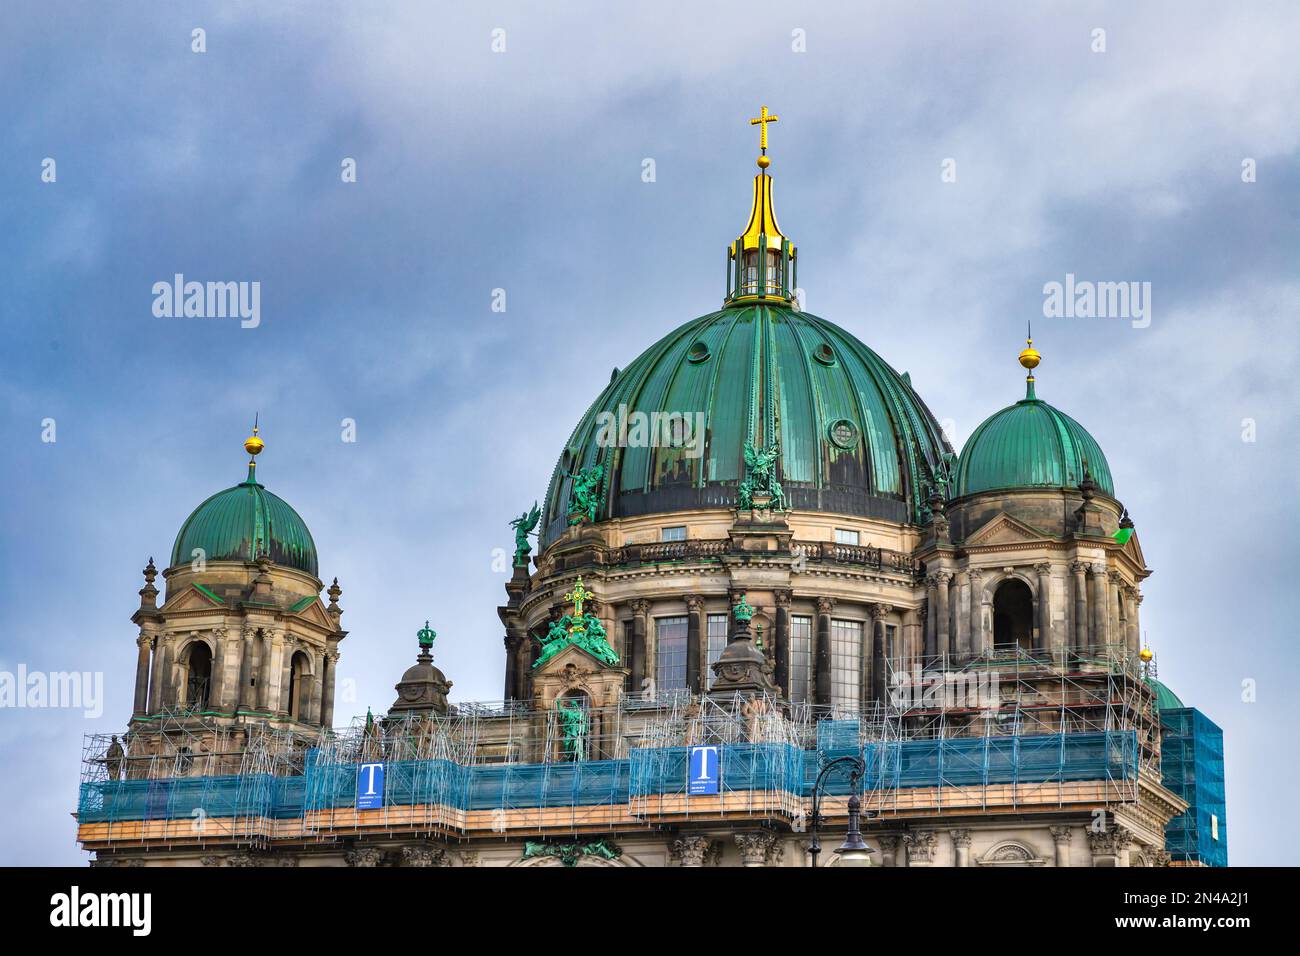 The Berlin Cathedral. Bronze sculptures on the Berliner Dom. Evangelical Supreme Parish and Collegiate Church. Museum Island in central Berlin. Stock Photo